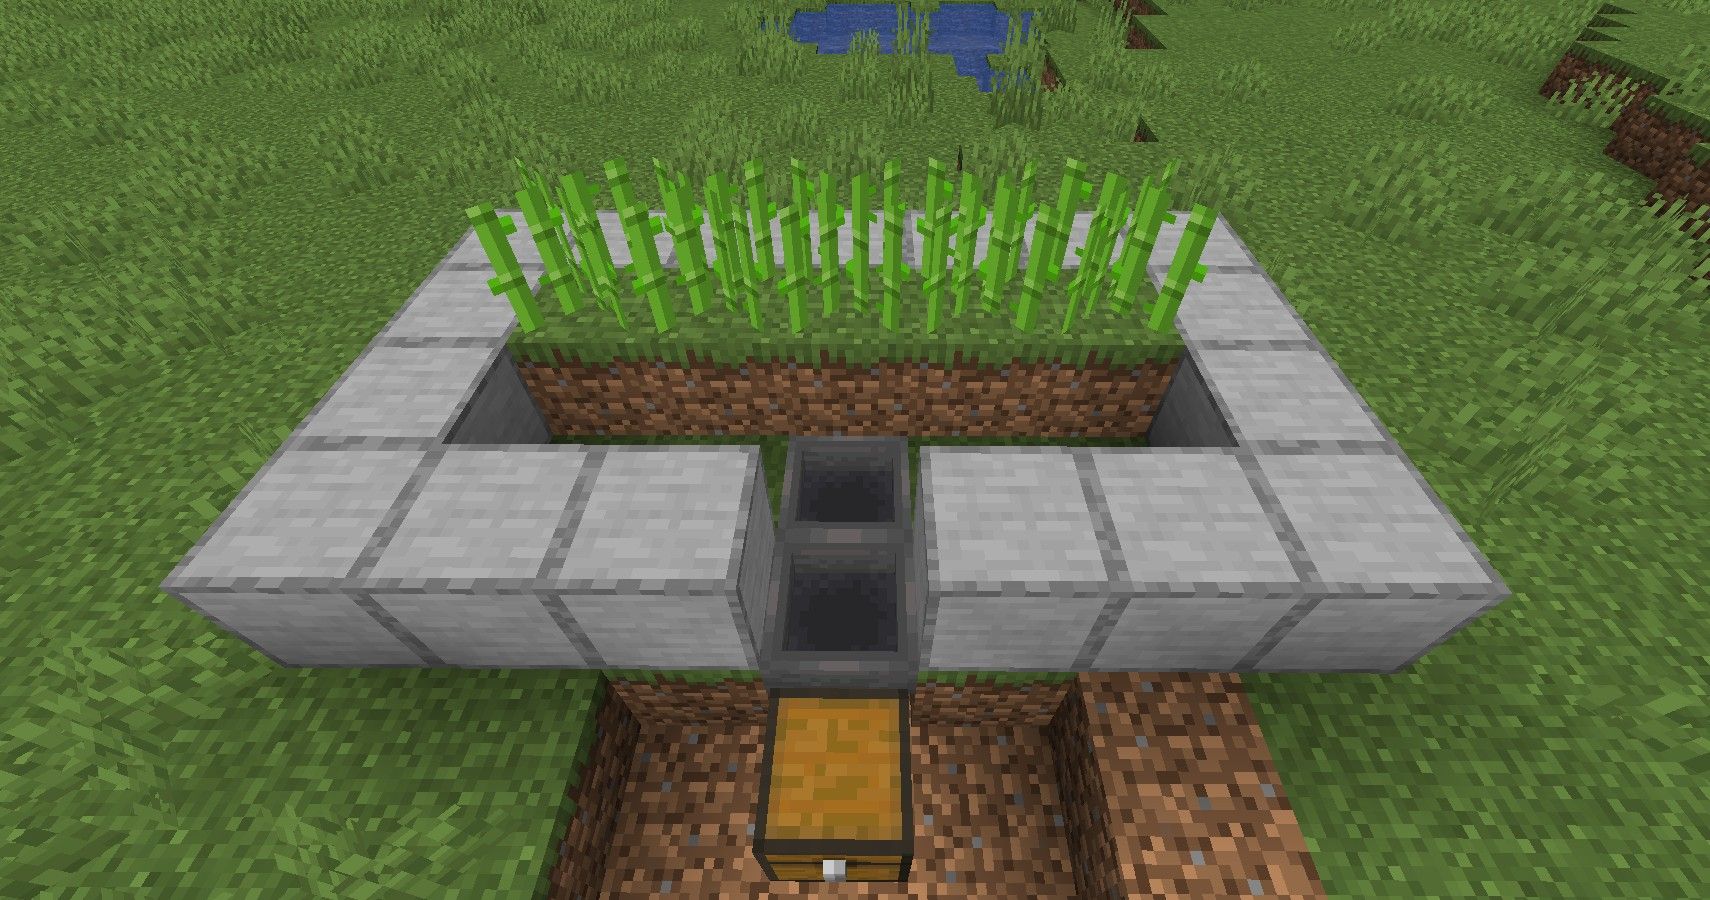 Example of Hopper Collection System for Minecraft sugarcane farm